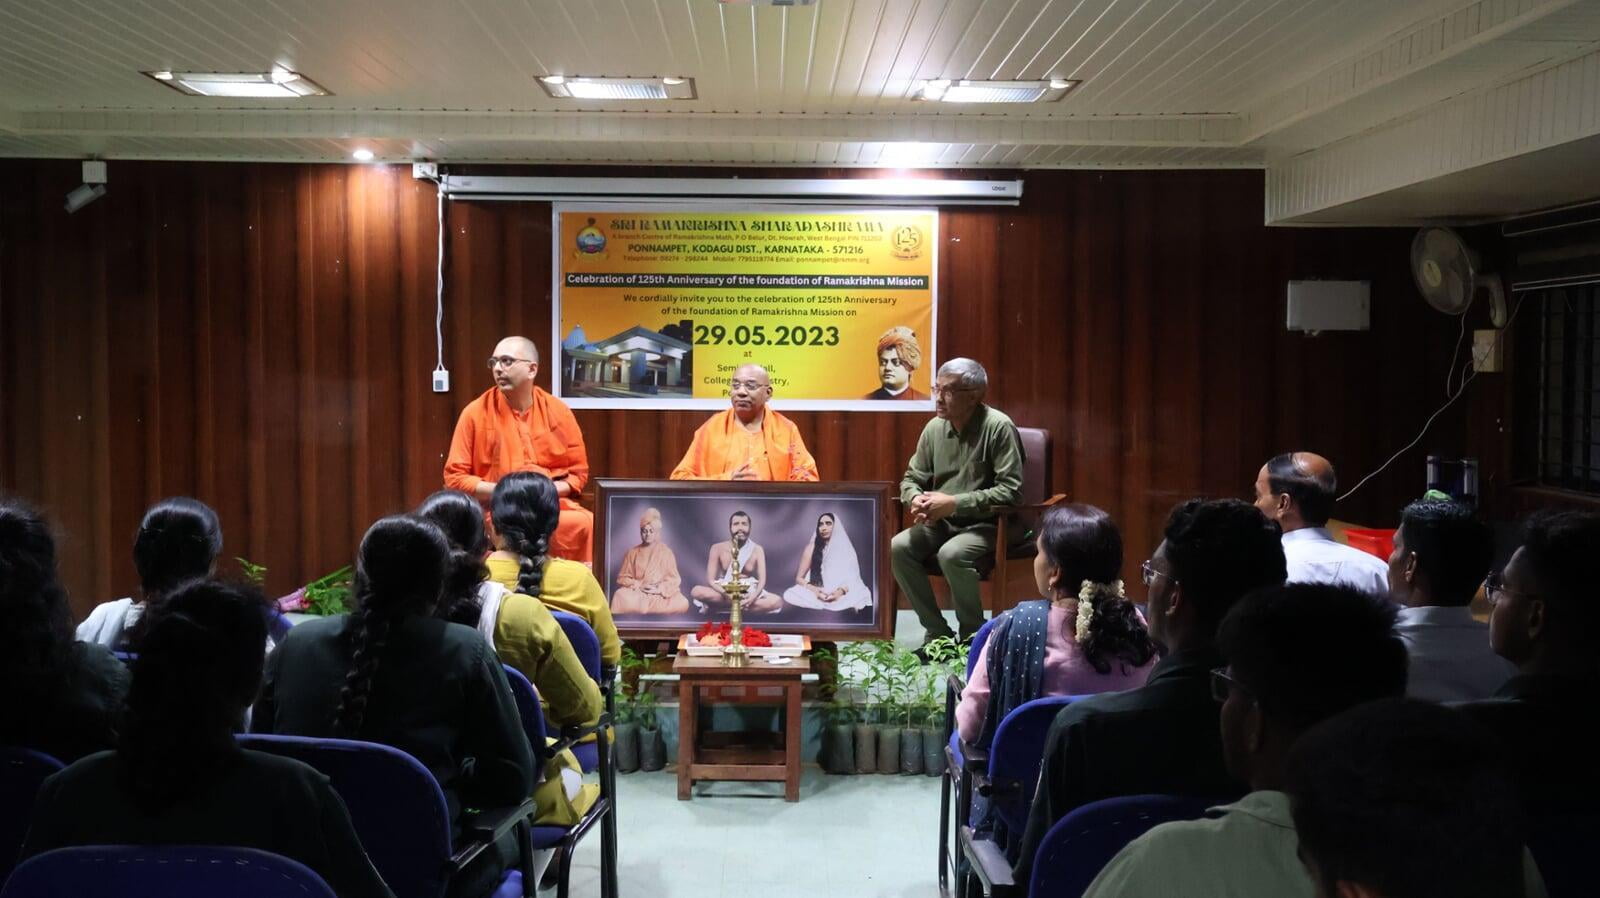 Celebration of 125th Anniversary of Ramakrishna Math and Mission at College of Forest, Ponnampet